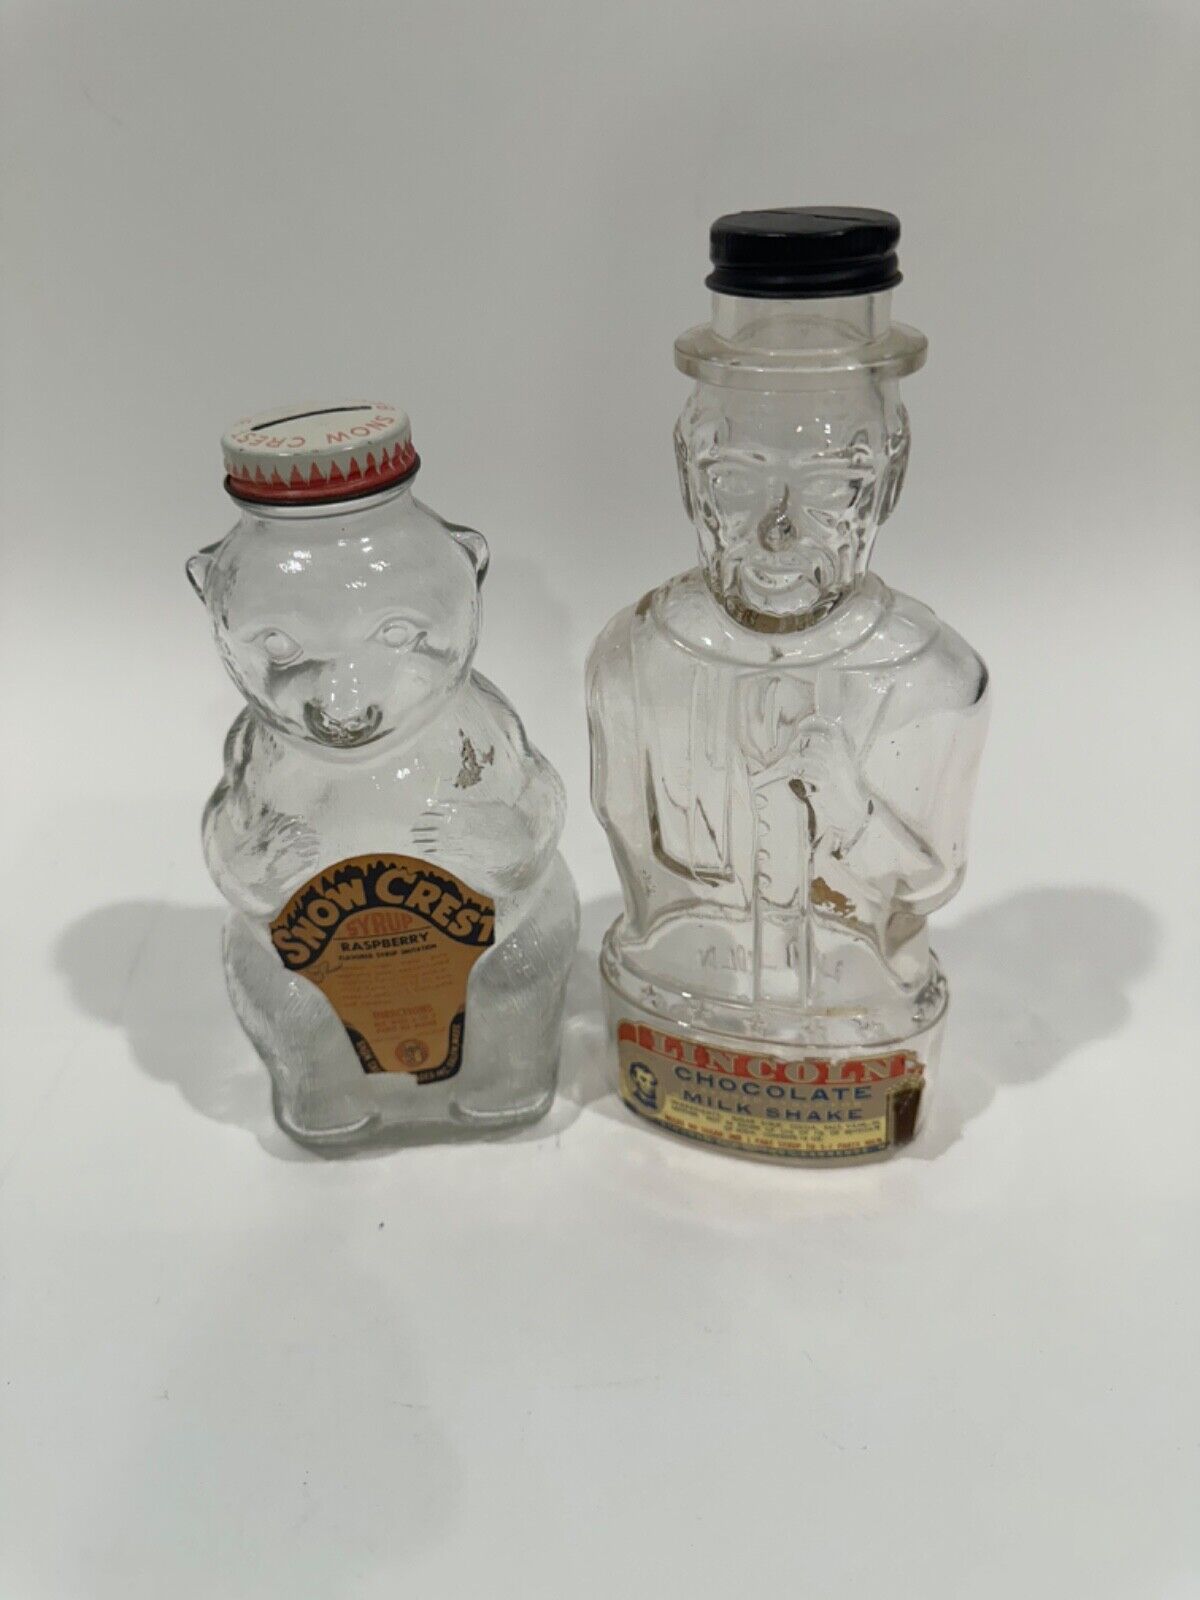 2 Rare Vintage Glass Bank Bottles from the 1950s: Lincoln & Bear Figurines~Class